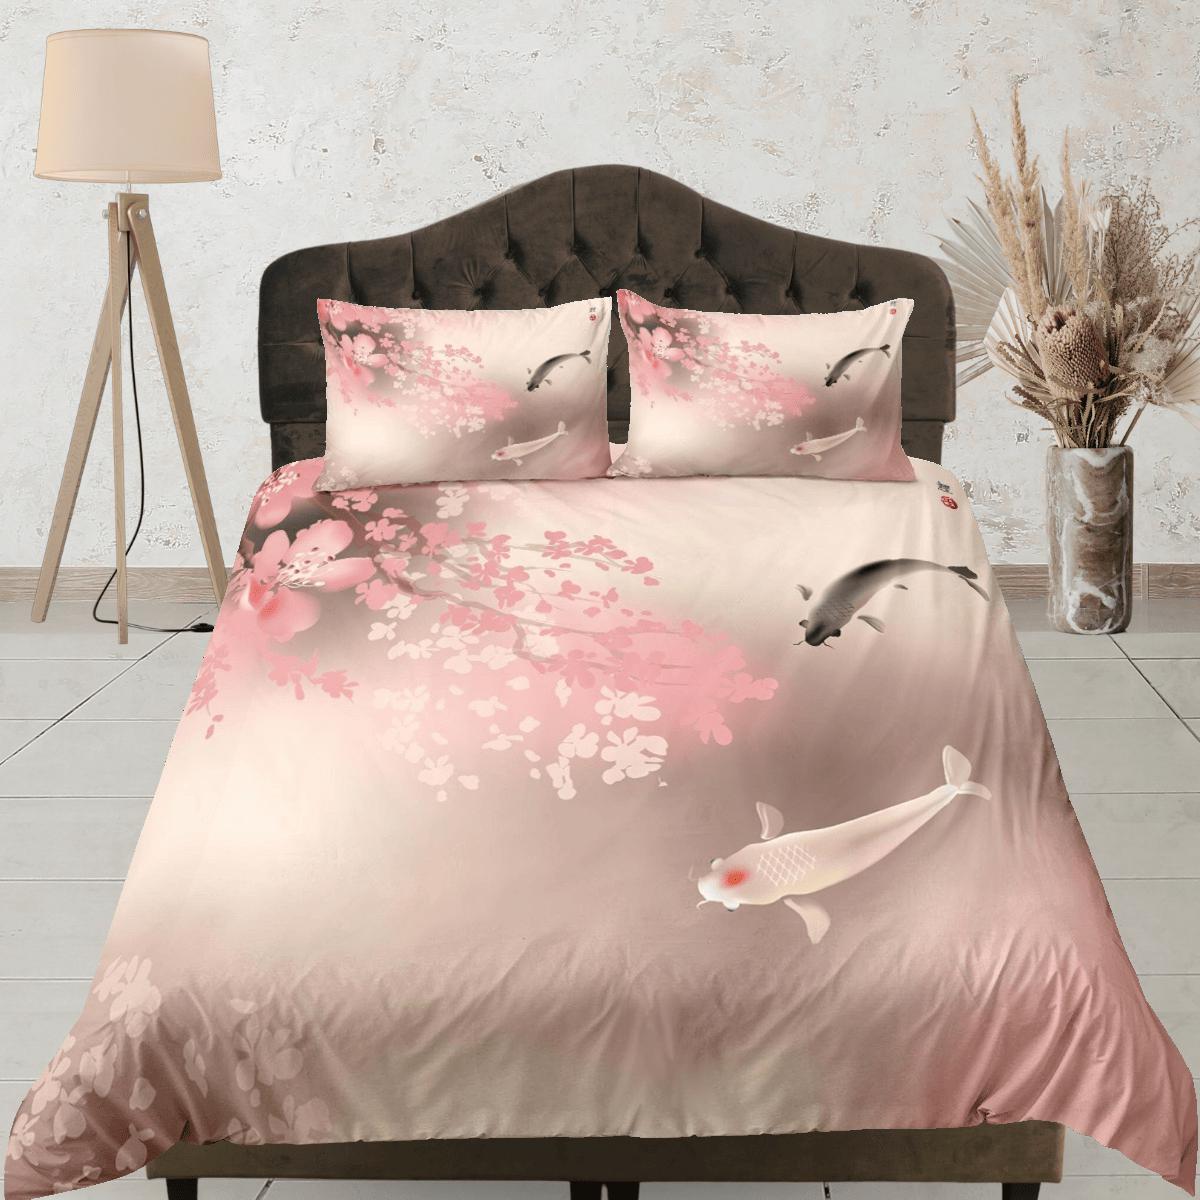 daintyduvet Koi fish pink oriental bedding, floral prints on japanese duvet cover set for king, queen, full, twin, single, toddler, minimalist bedding